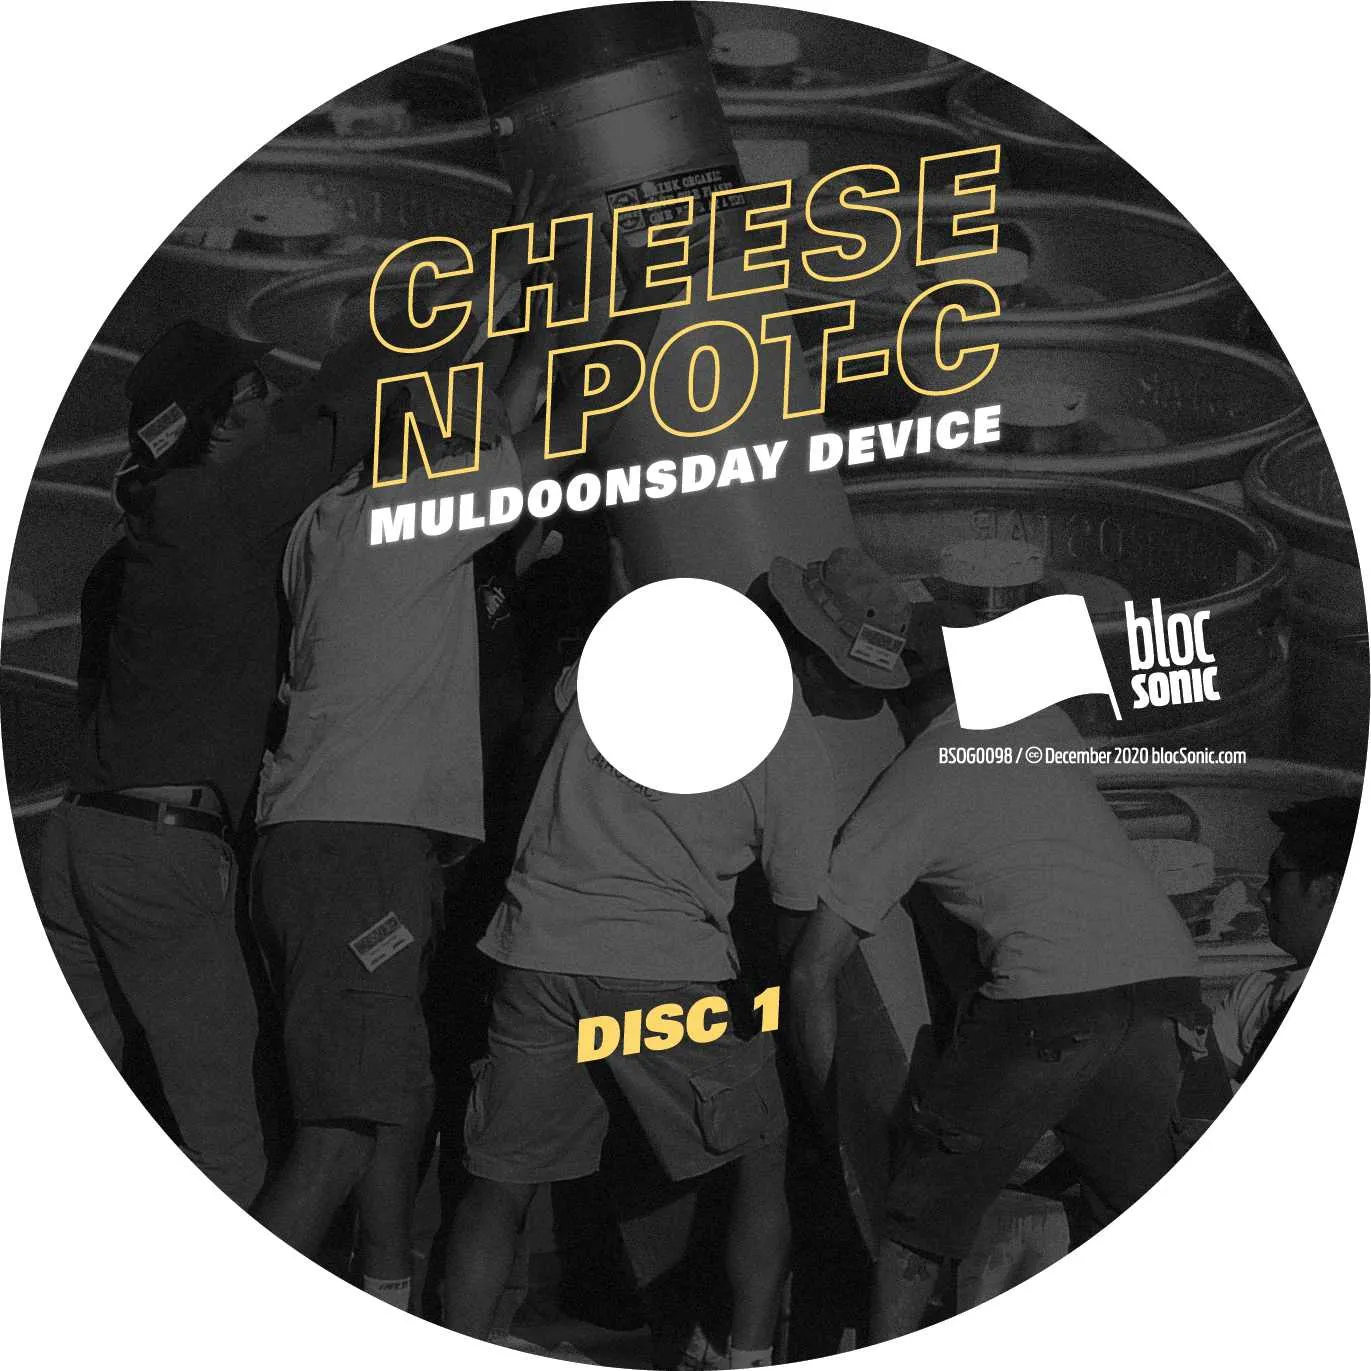 Album disc for “Muldoonsday Device” by Cheese N Pot-C